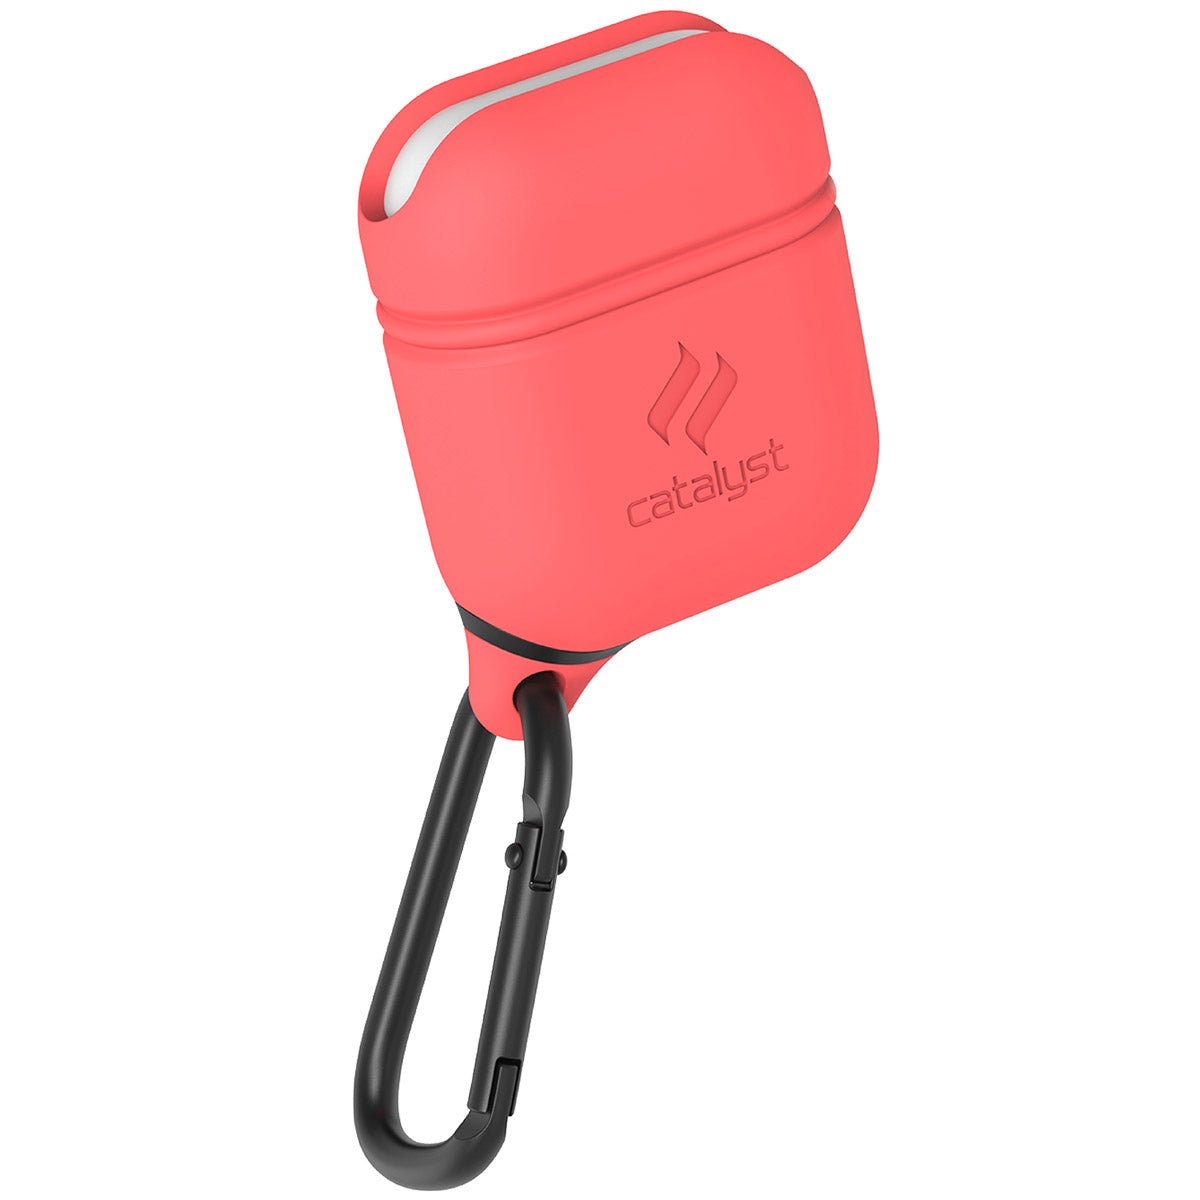 CATAPDCOR | Catalyst airpods gen2/1 waterproof case + carabiner showing the front view of the case in coral